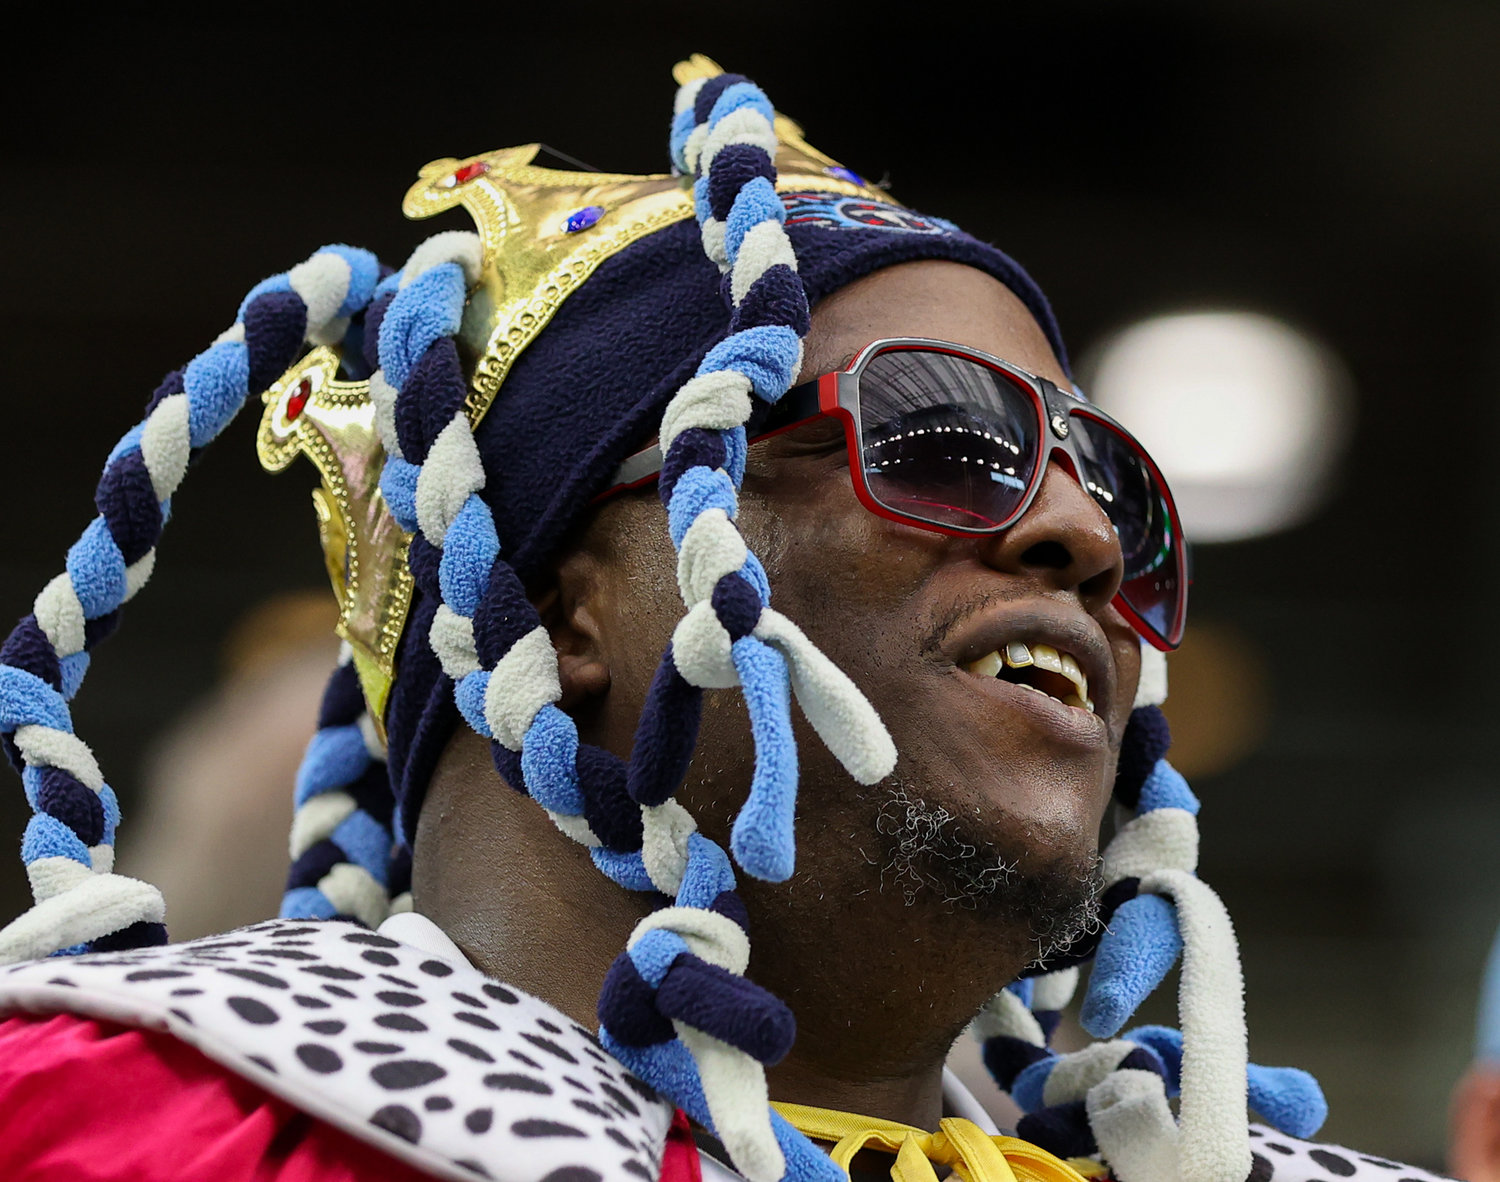 A Tennessee Titans fan during an NFL game between the Texans and the Titans on Jan. 9, 2022 in Houston, Texas. The Titans won, 28-25.